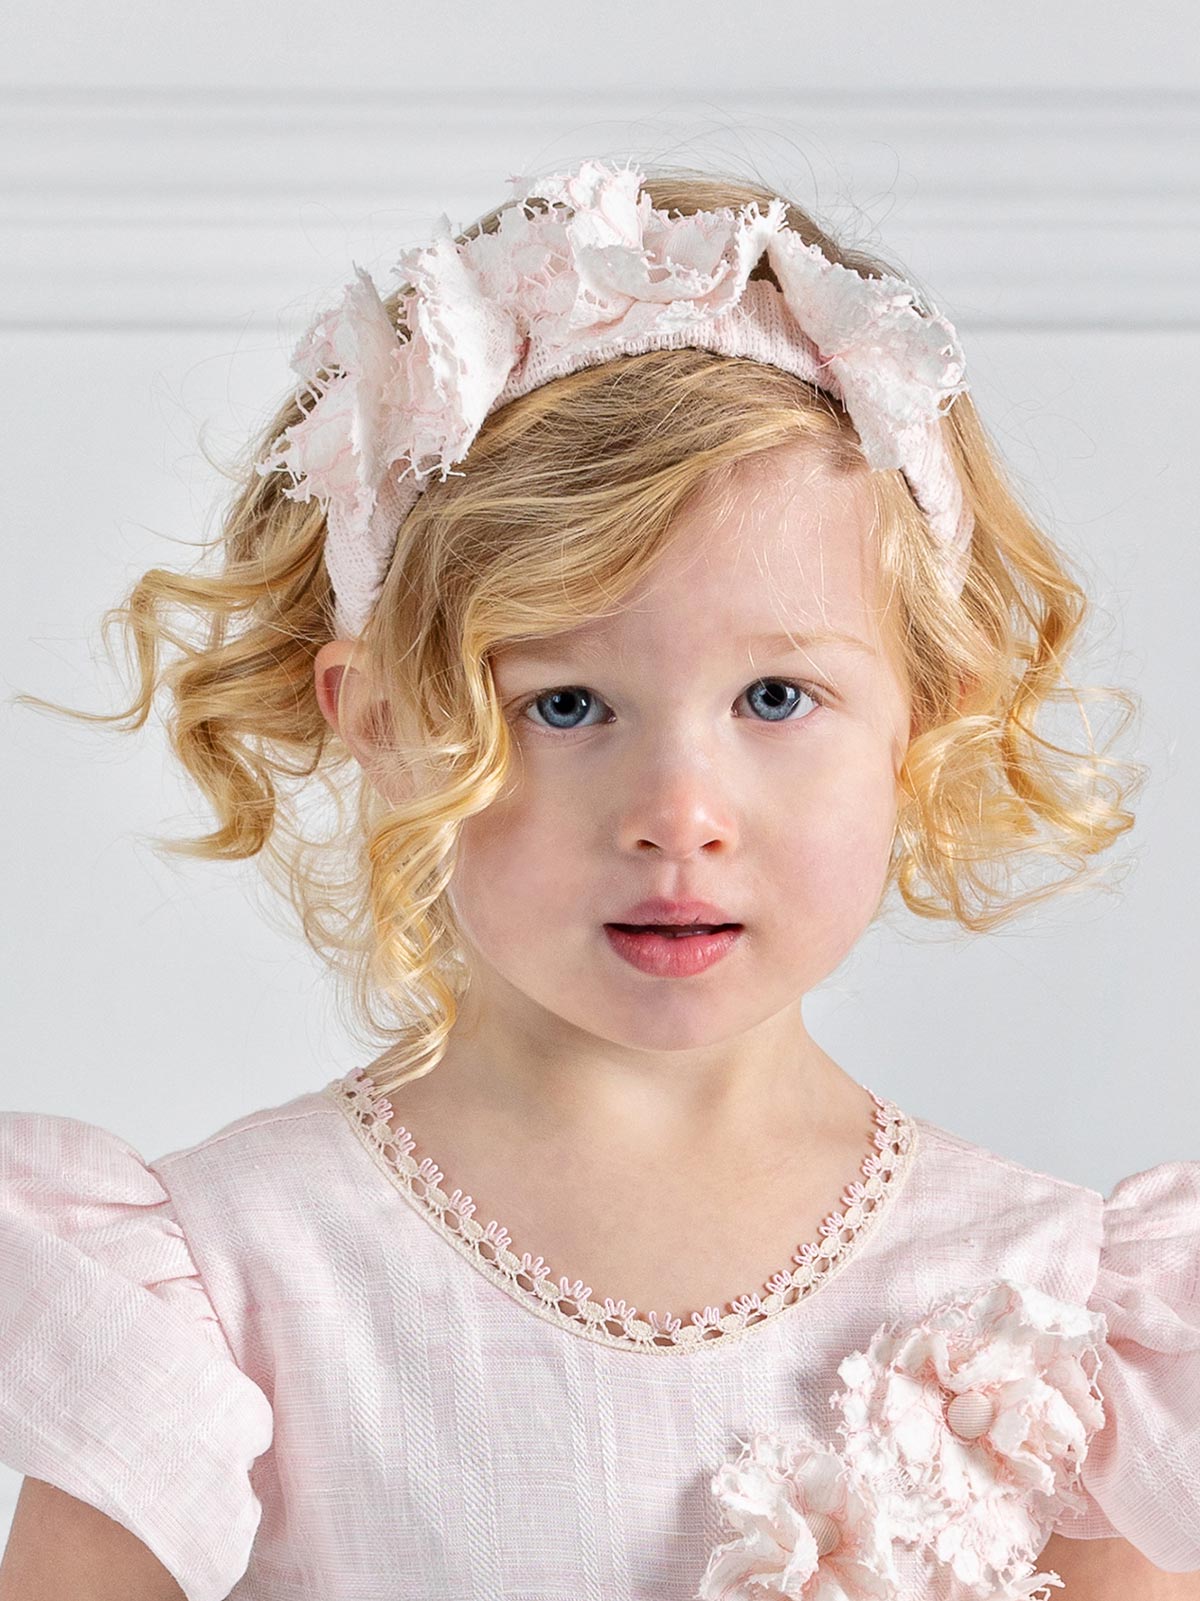 Girl's Headband with lace flowers - MIDJE